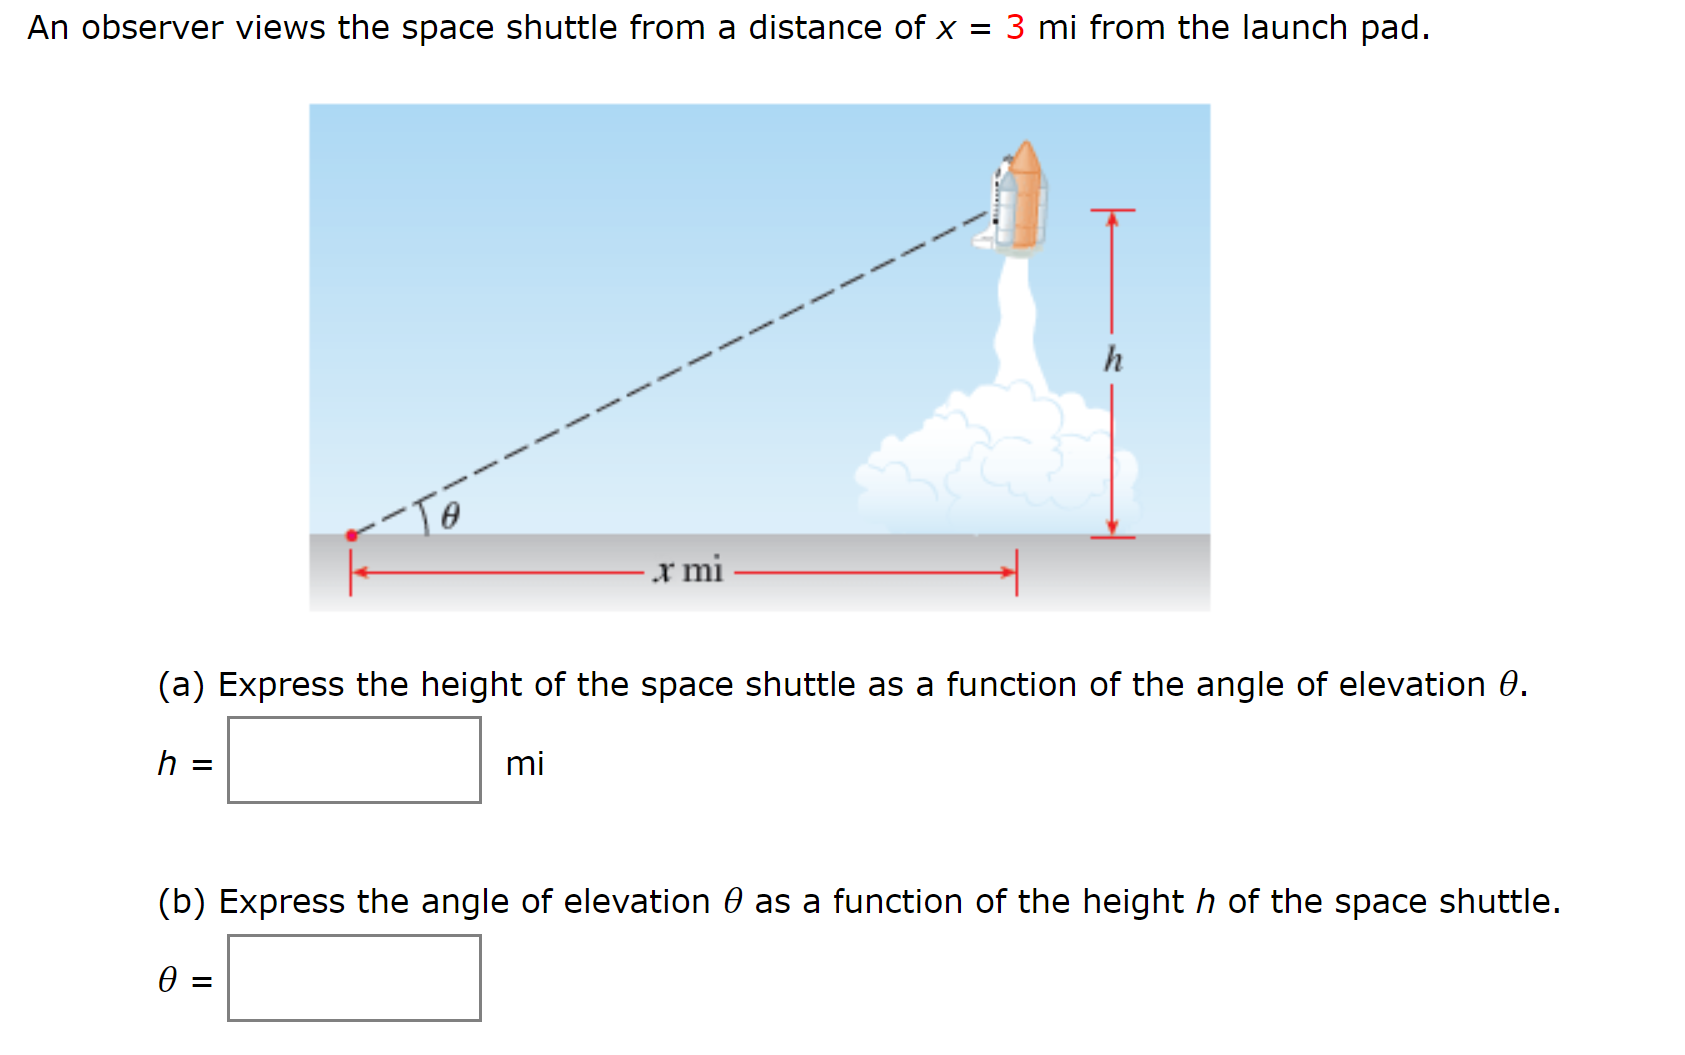 An observer views the space shuttle from a distance of x = 3 mi from the launch pad.
x mi
(a) Express the height of the space shuttle as a function of the angle of elevation 0.
mi
(b) Express the angle of elevation 0 as a function of the height h of the space shuttle.
